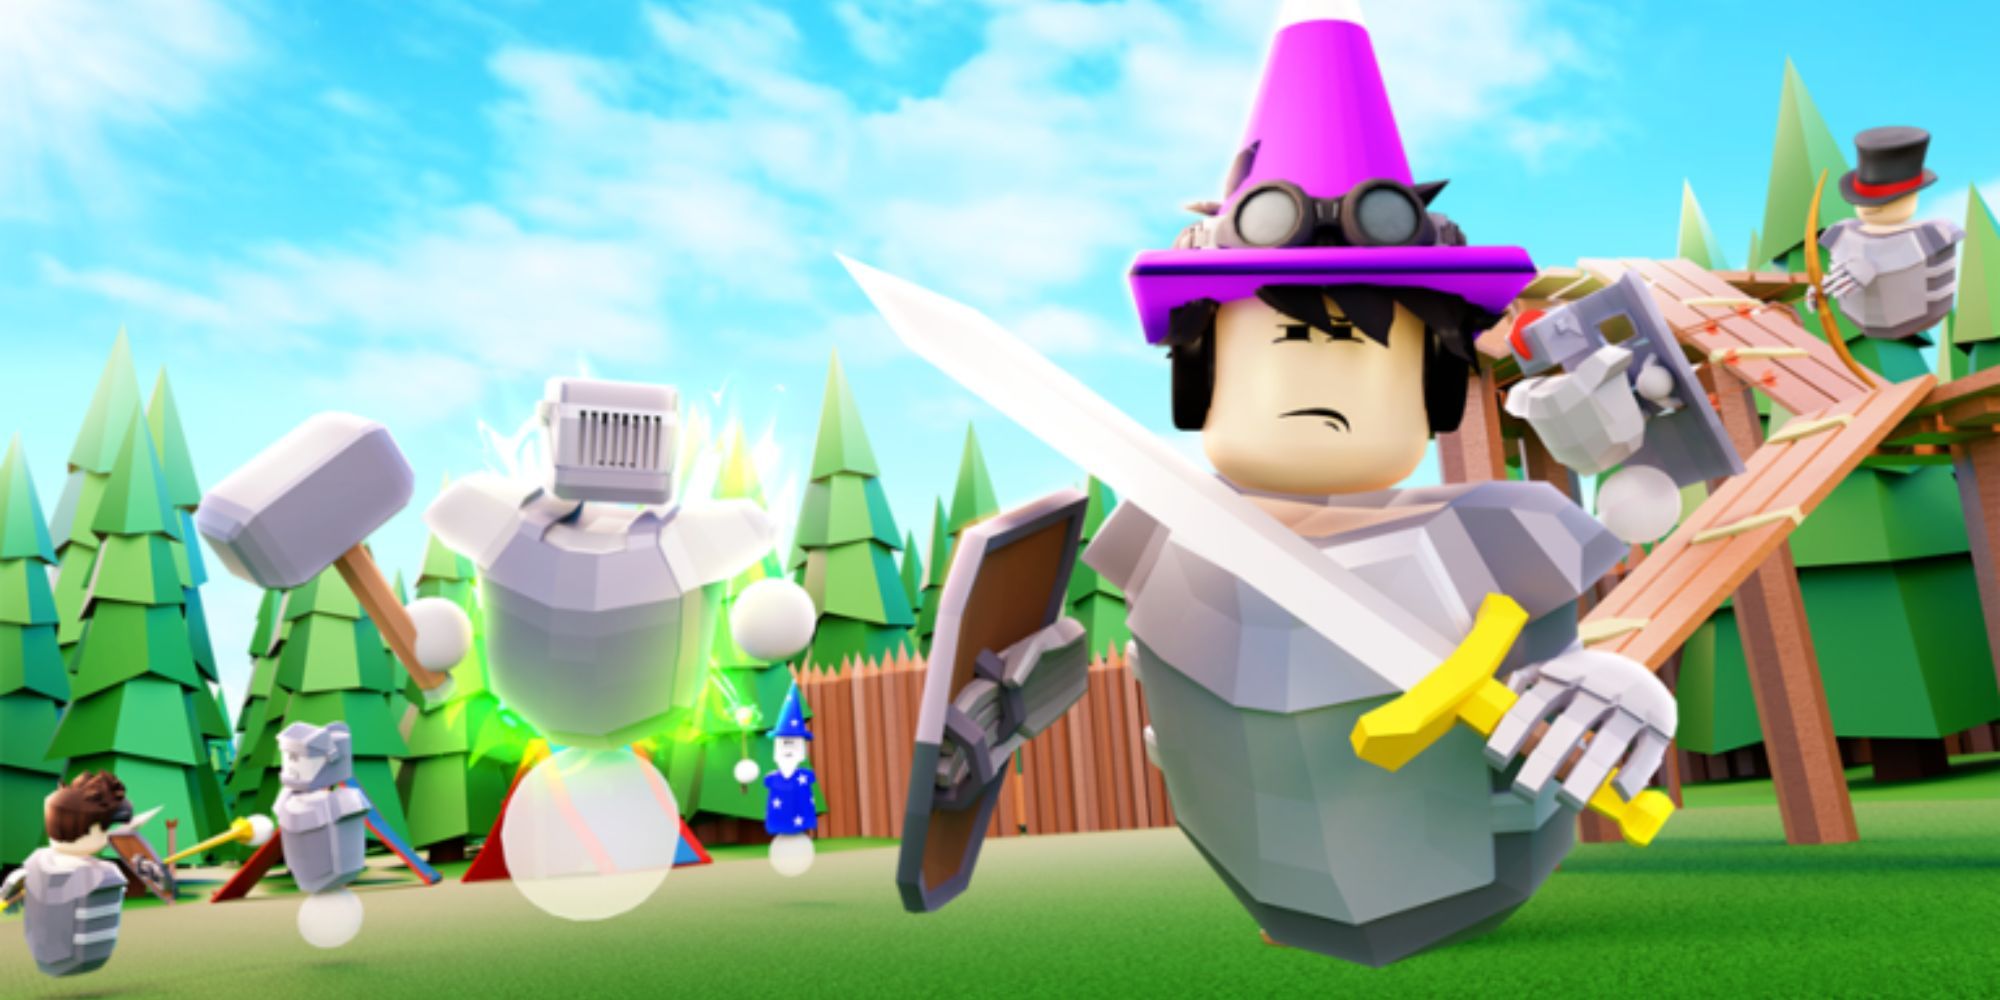 Promo image for Clashers VR in Roblox